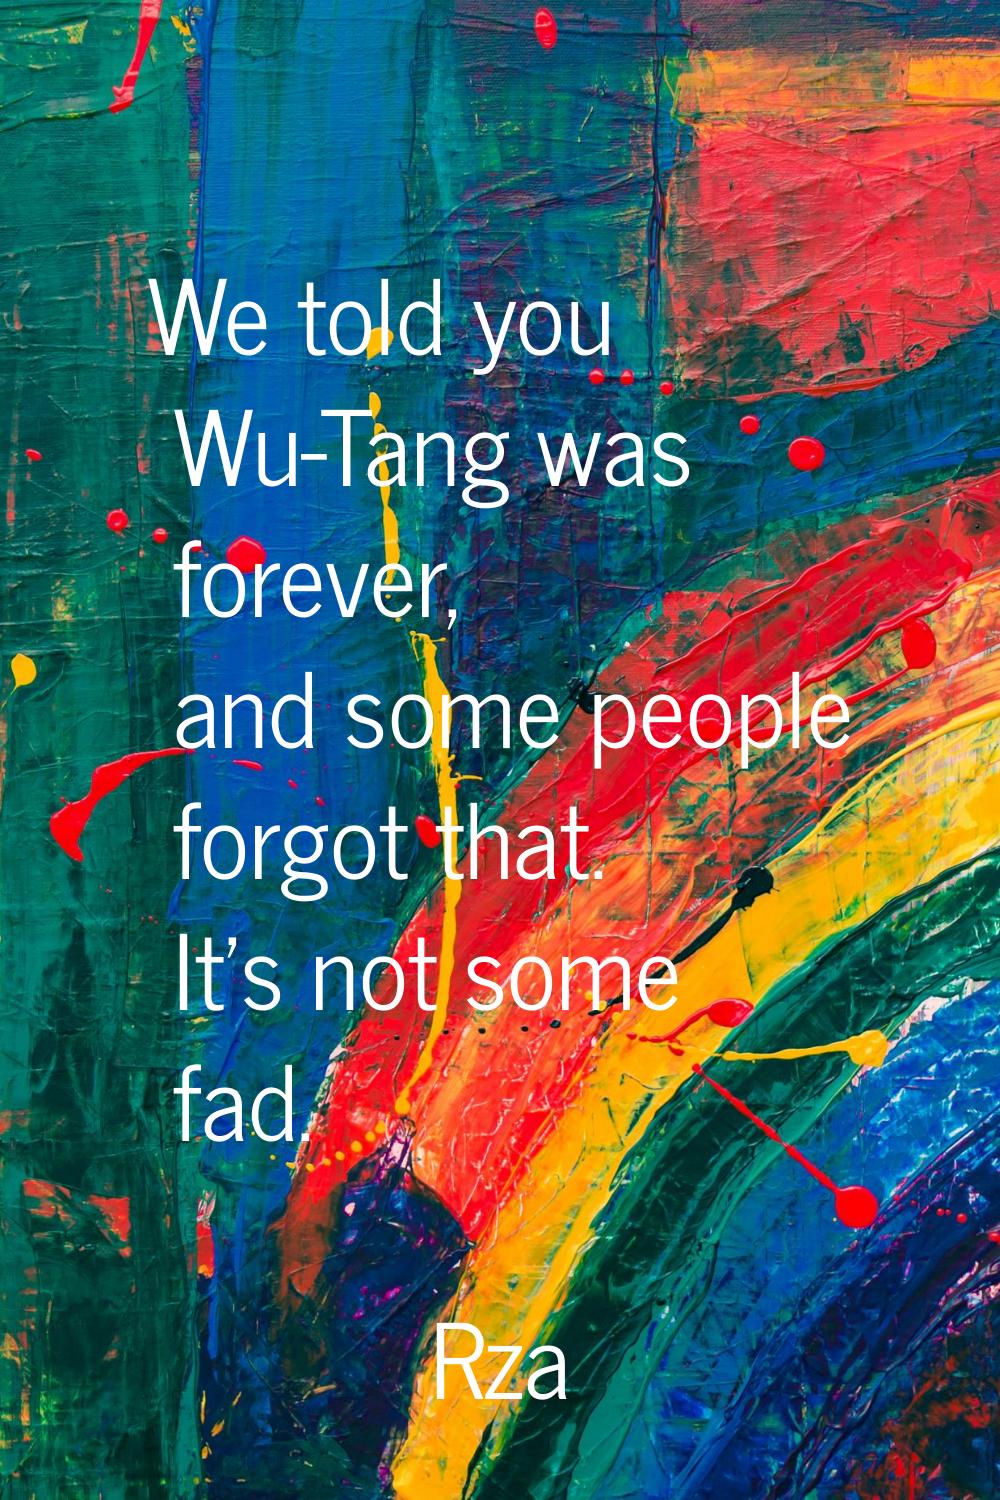 We told you Wu-Tang was forever, and some people forgot that. It's not some fad.